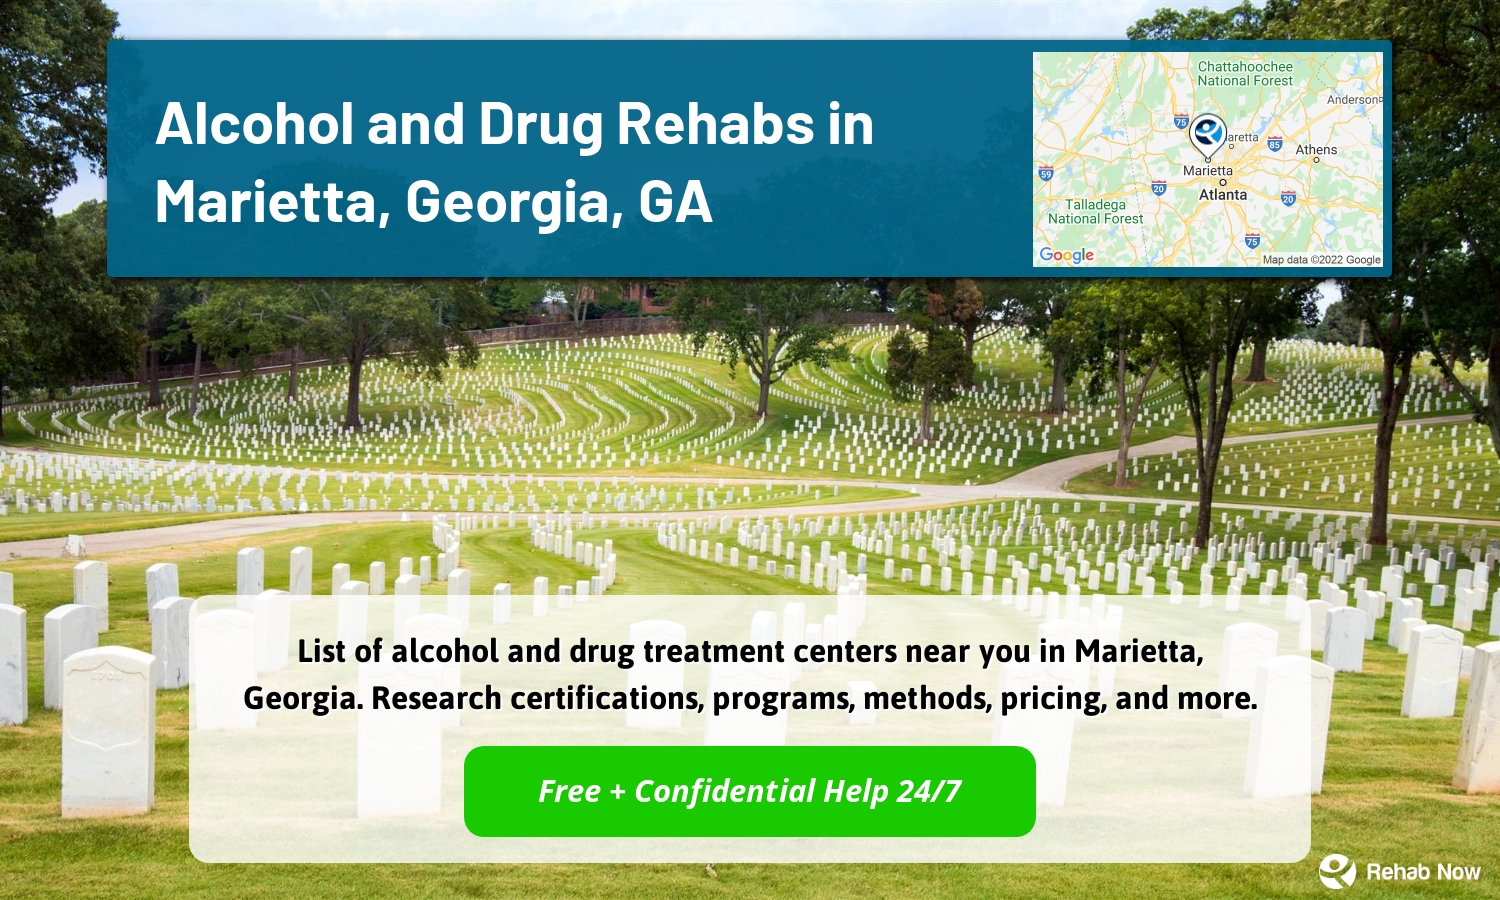 List of alcohol and drug treatment centers near you in Marietta, Georgia. Research certifications, programs, methods, pricing, and more.